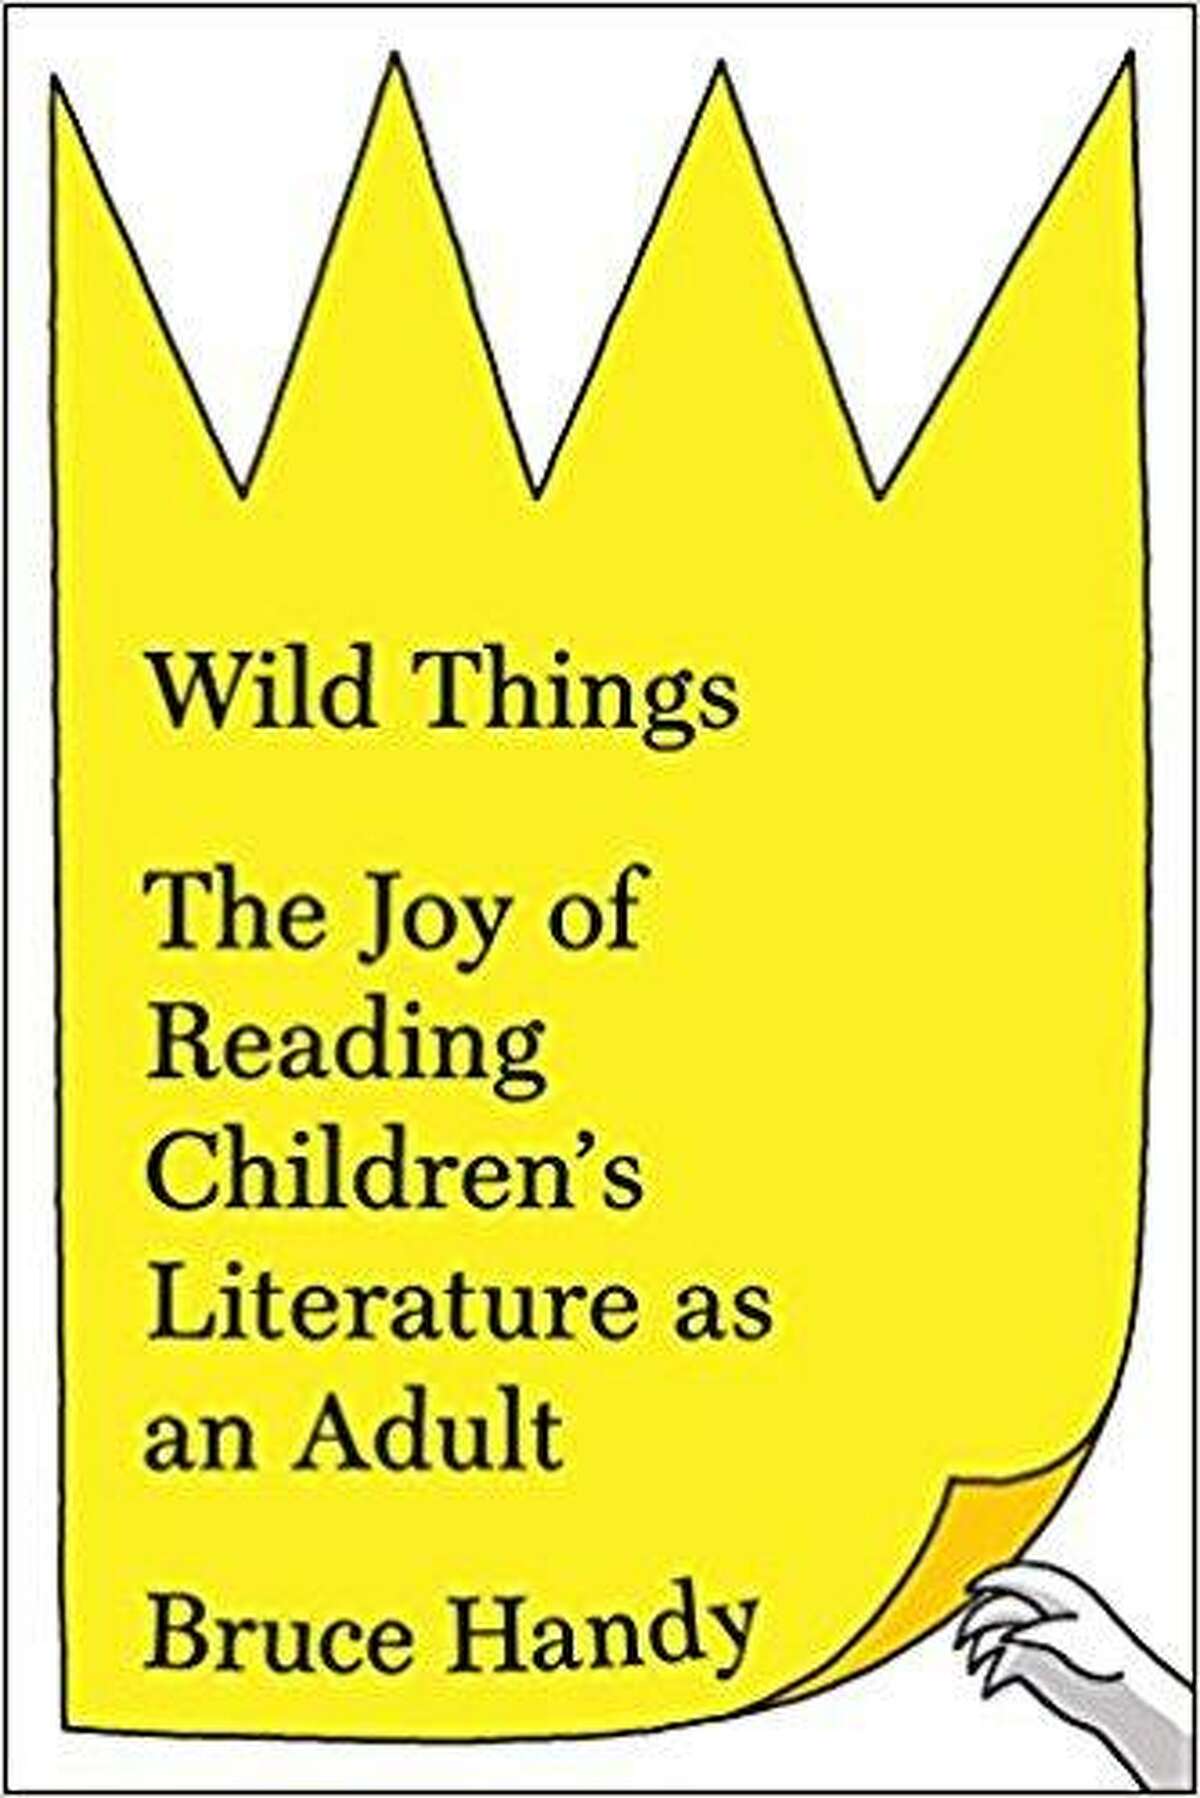 “Wild Things: The Joy of Reading Children’s Literature as an Adult” by Bruce Handy